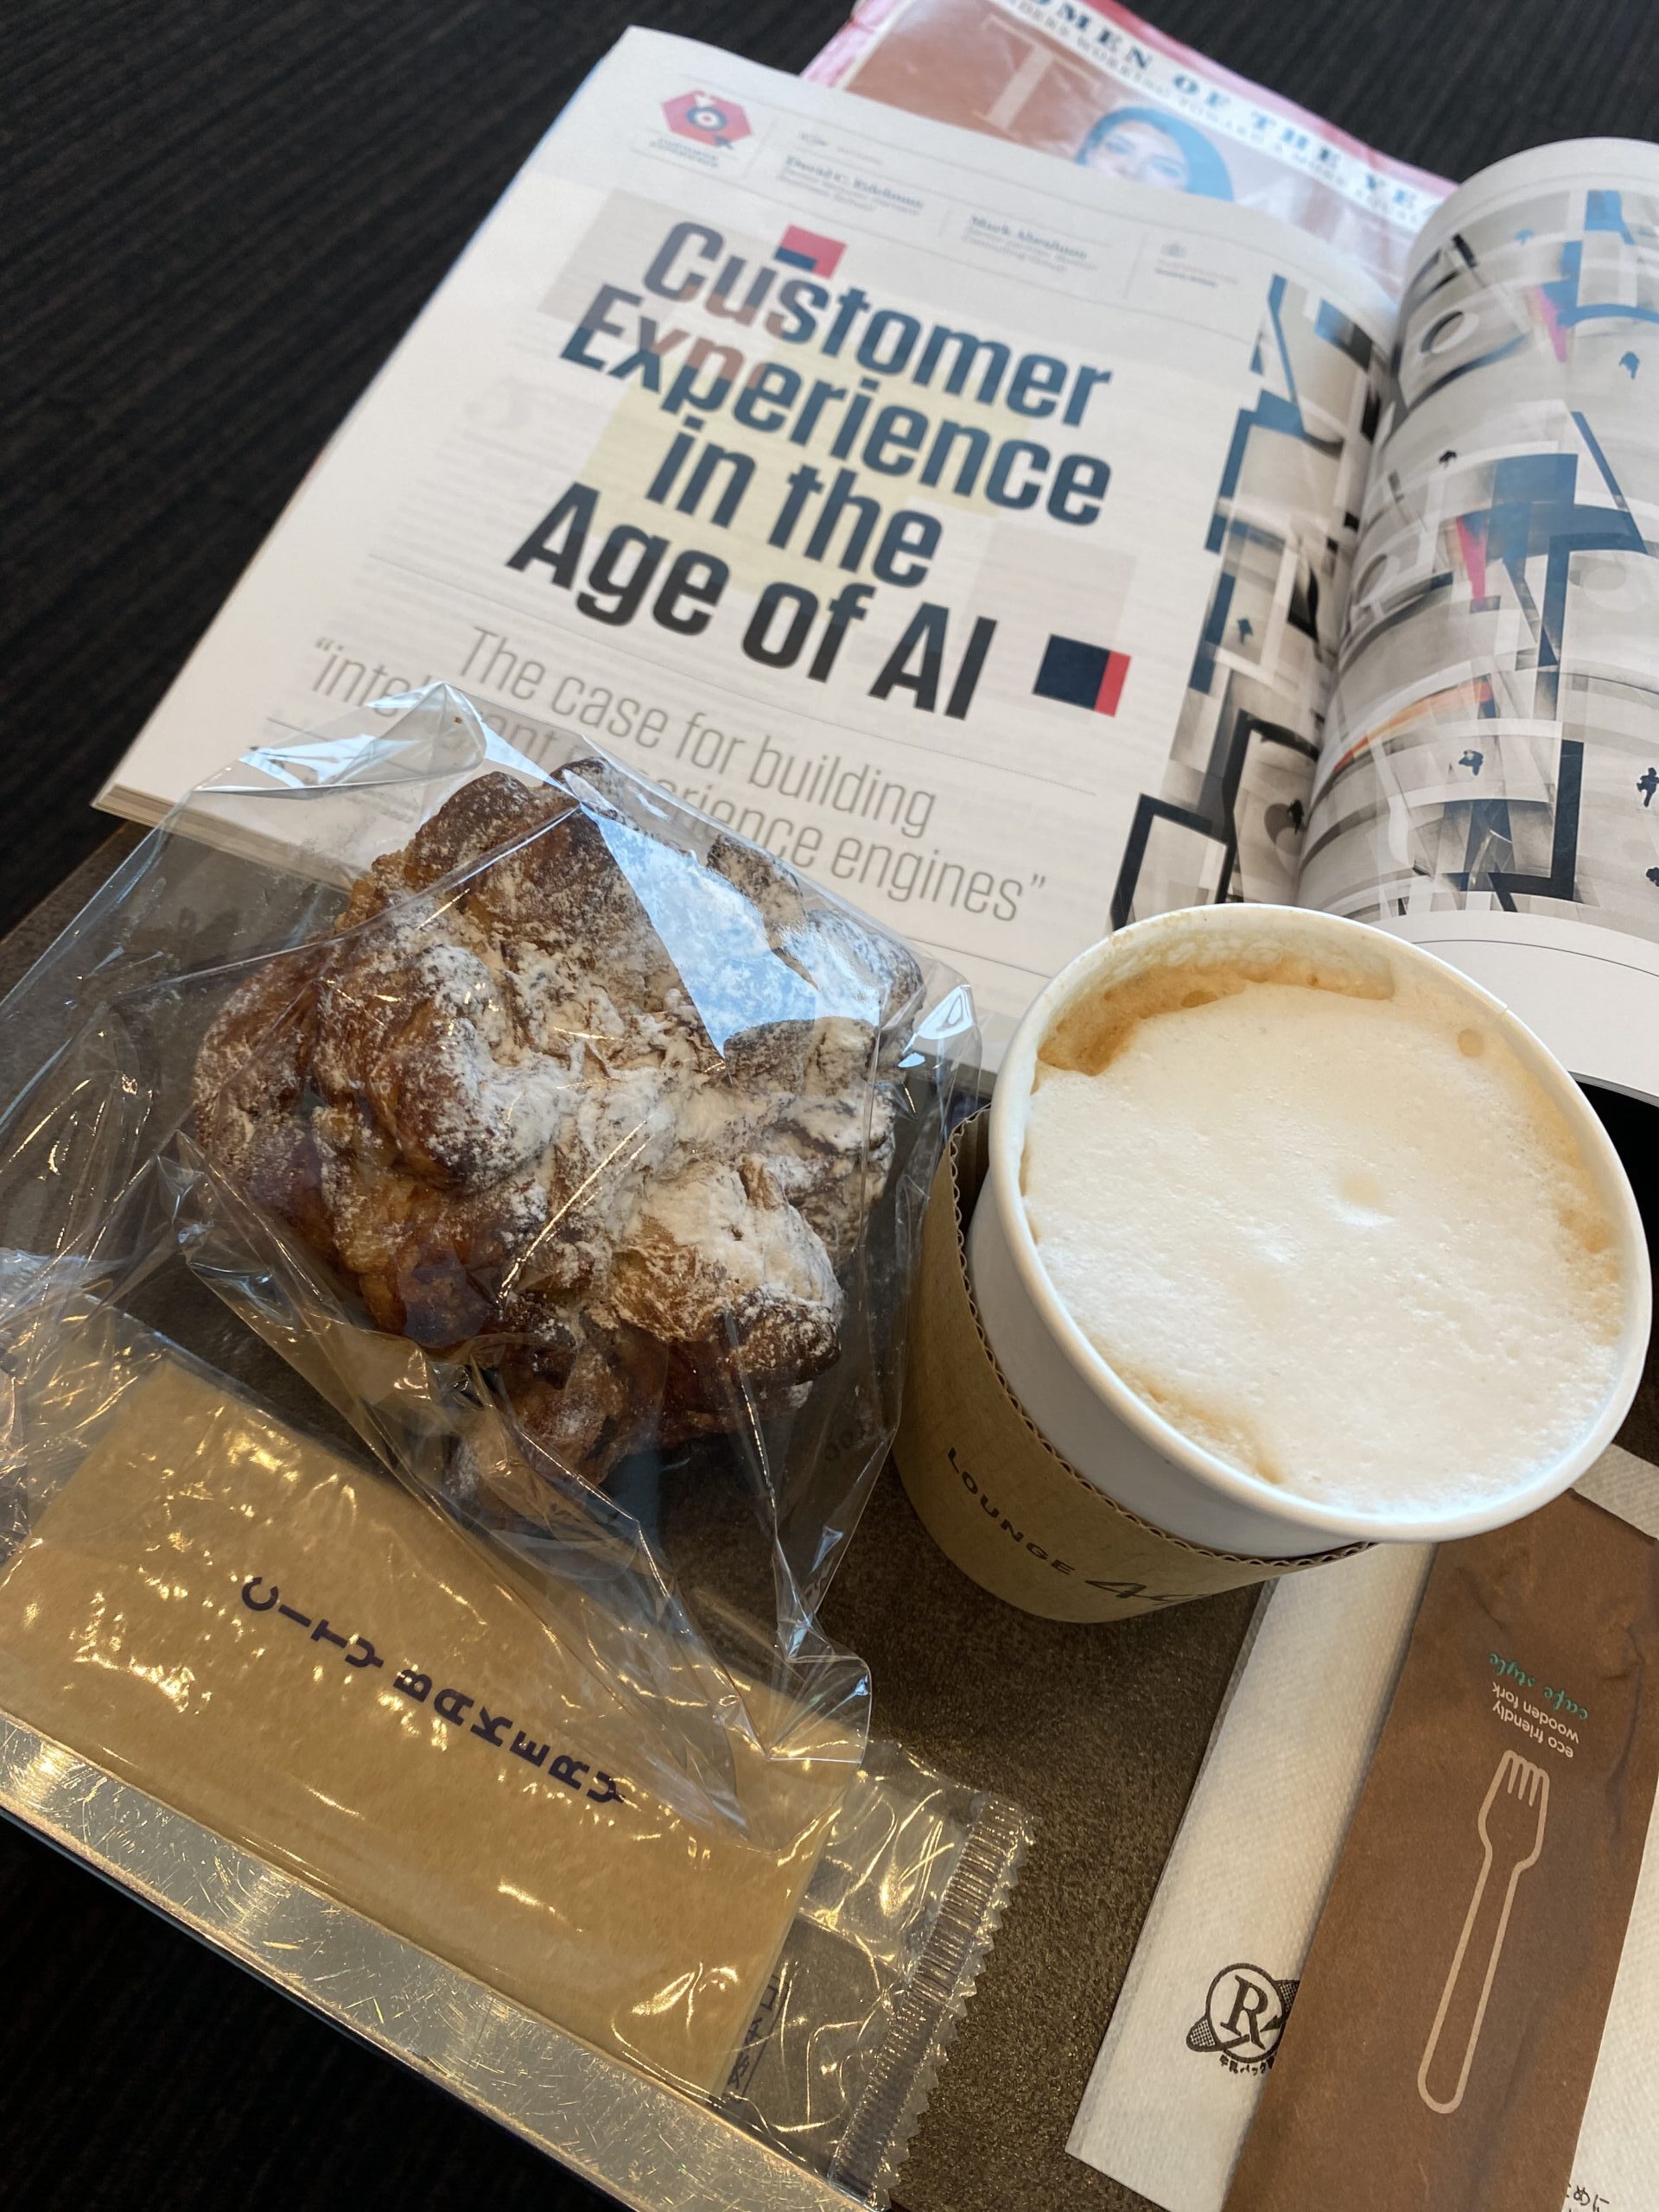 Harvard Business Review and a coffee (photo by Kay Koyama)